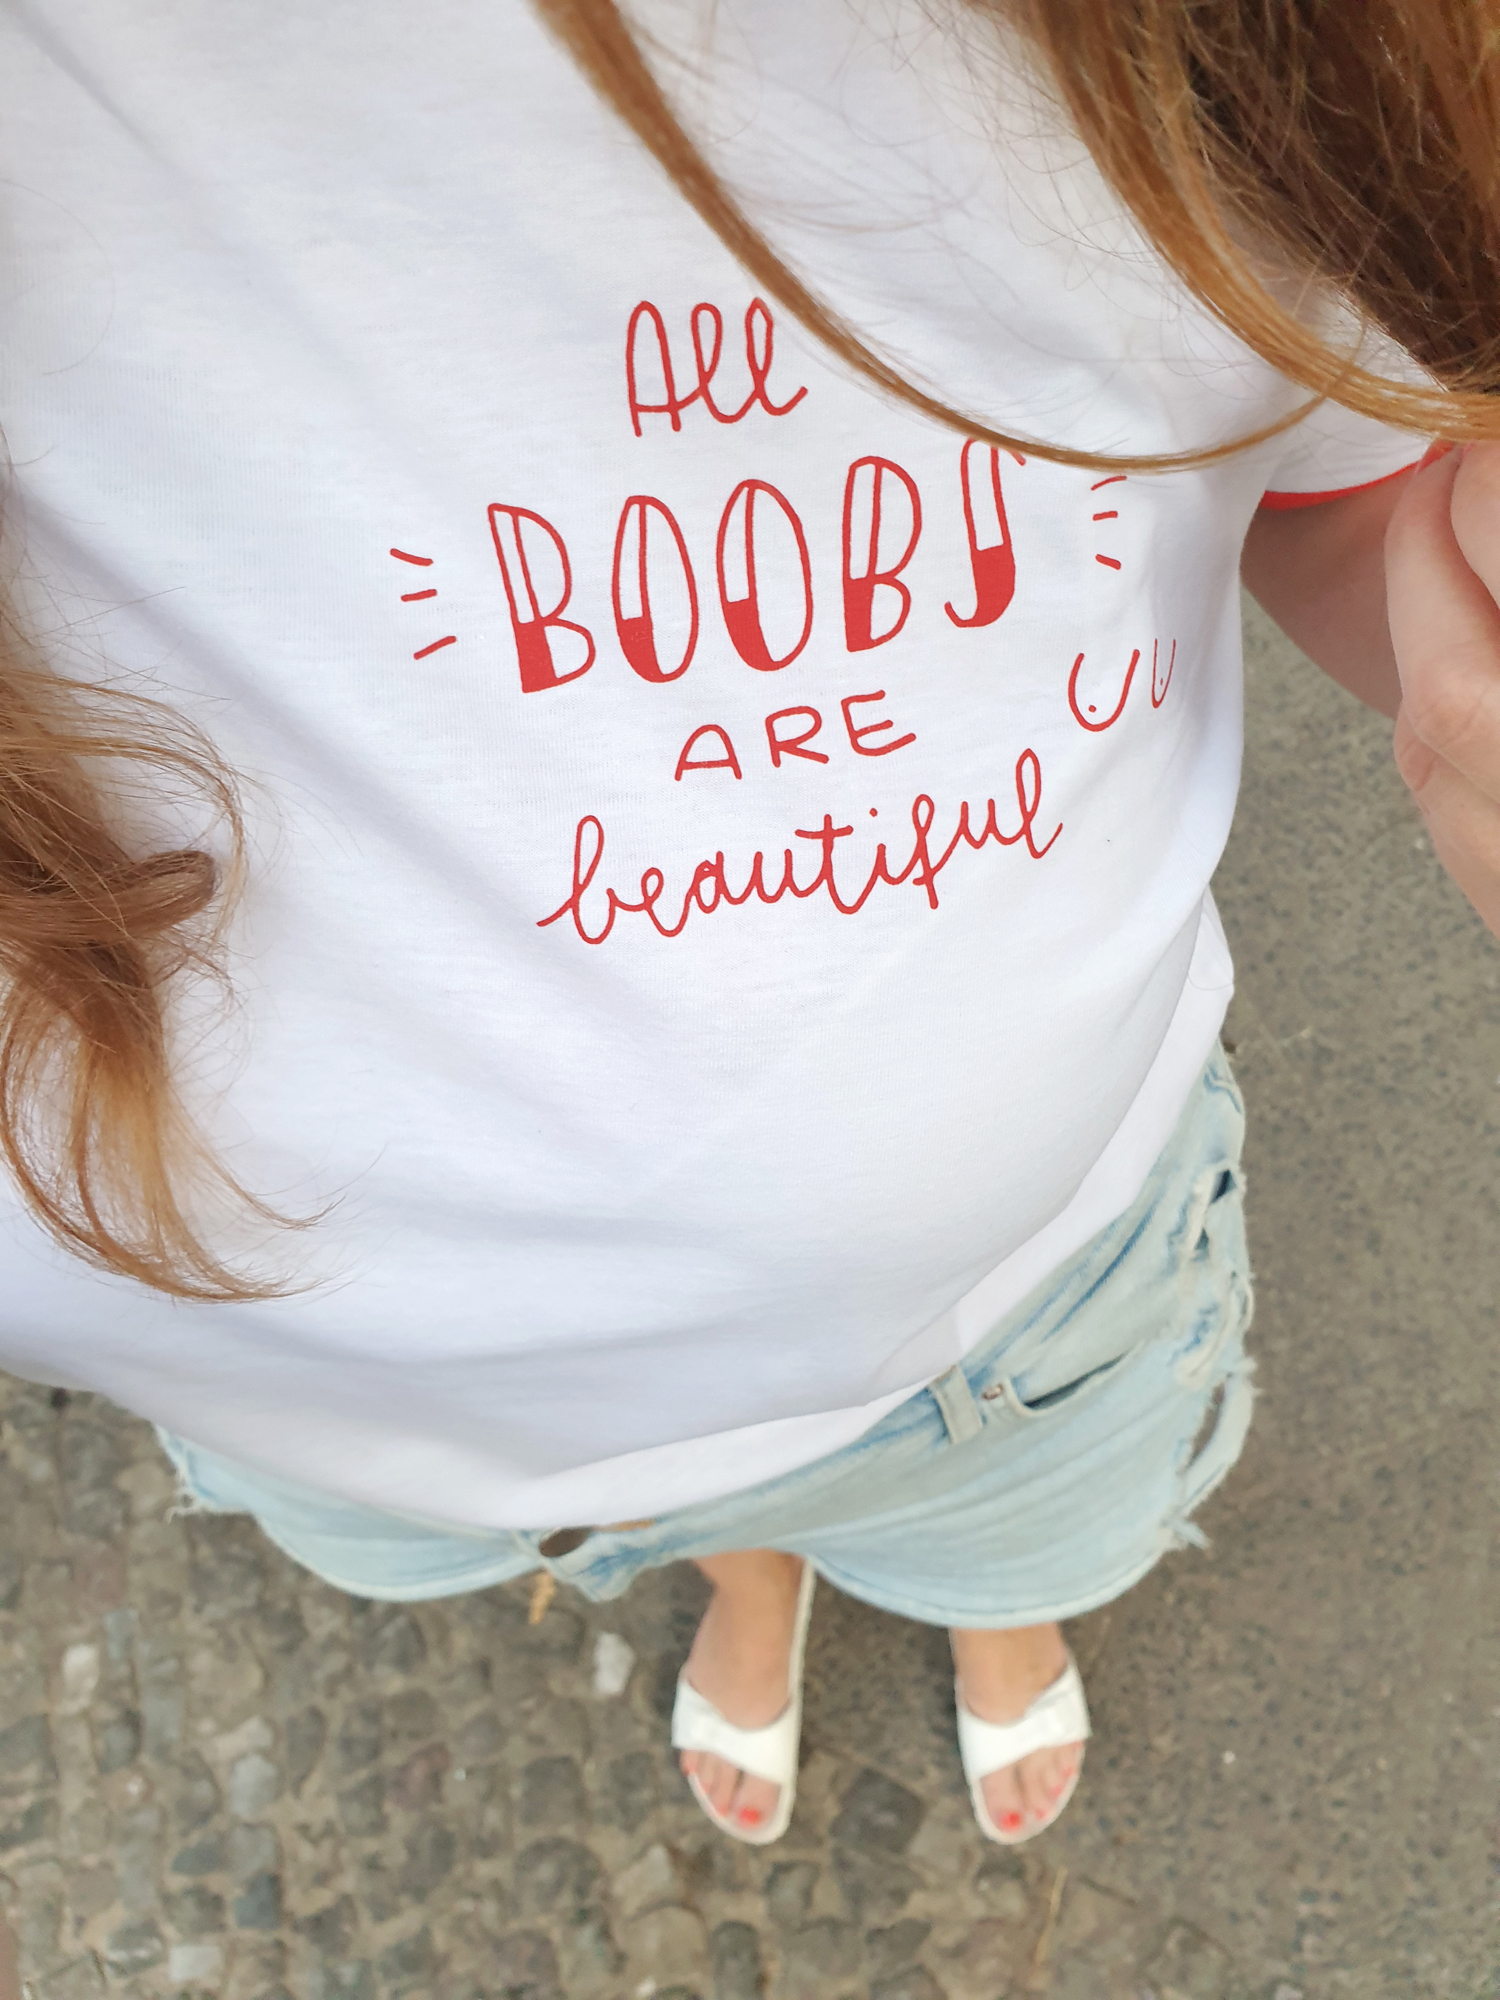 https://shop.uncle-m.com/uncle-m/uncle-m-t-shirt-all-boobs-are-beautiful-white.html